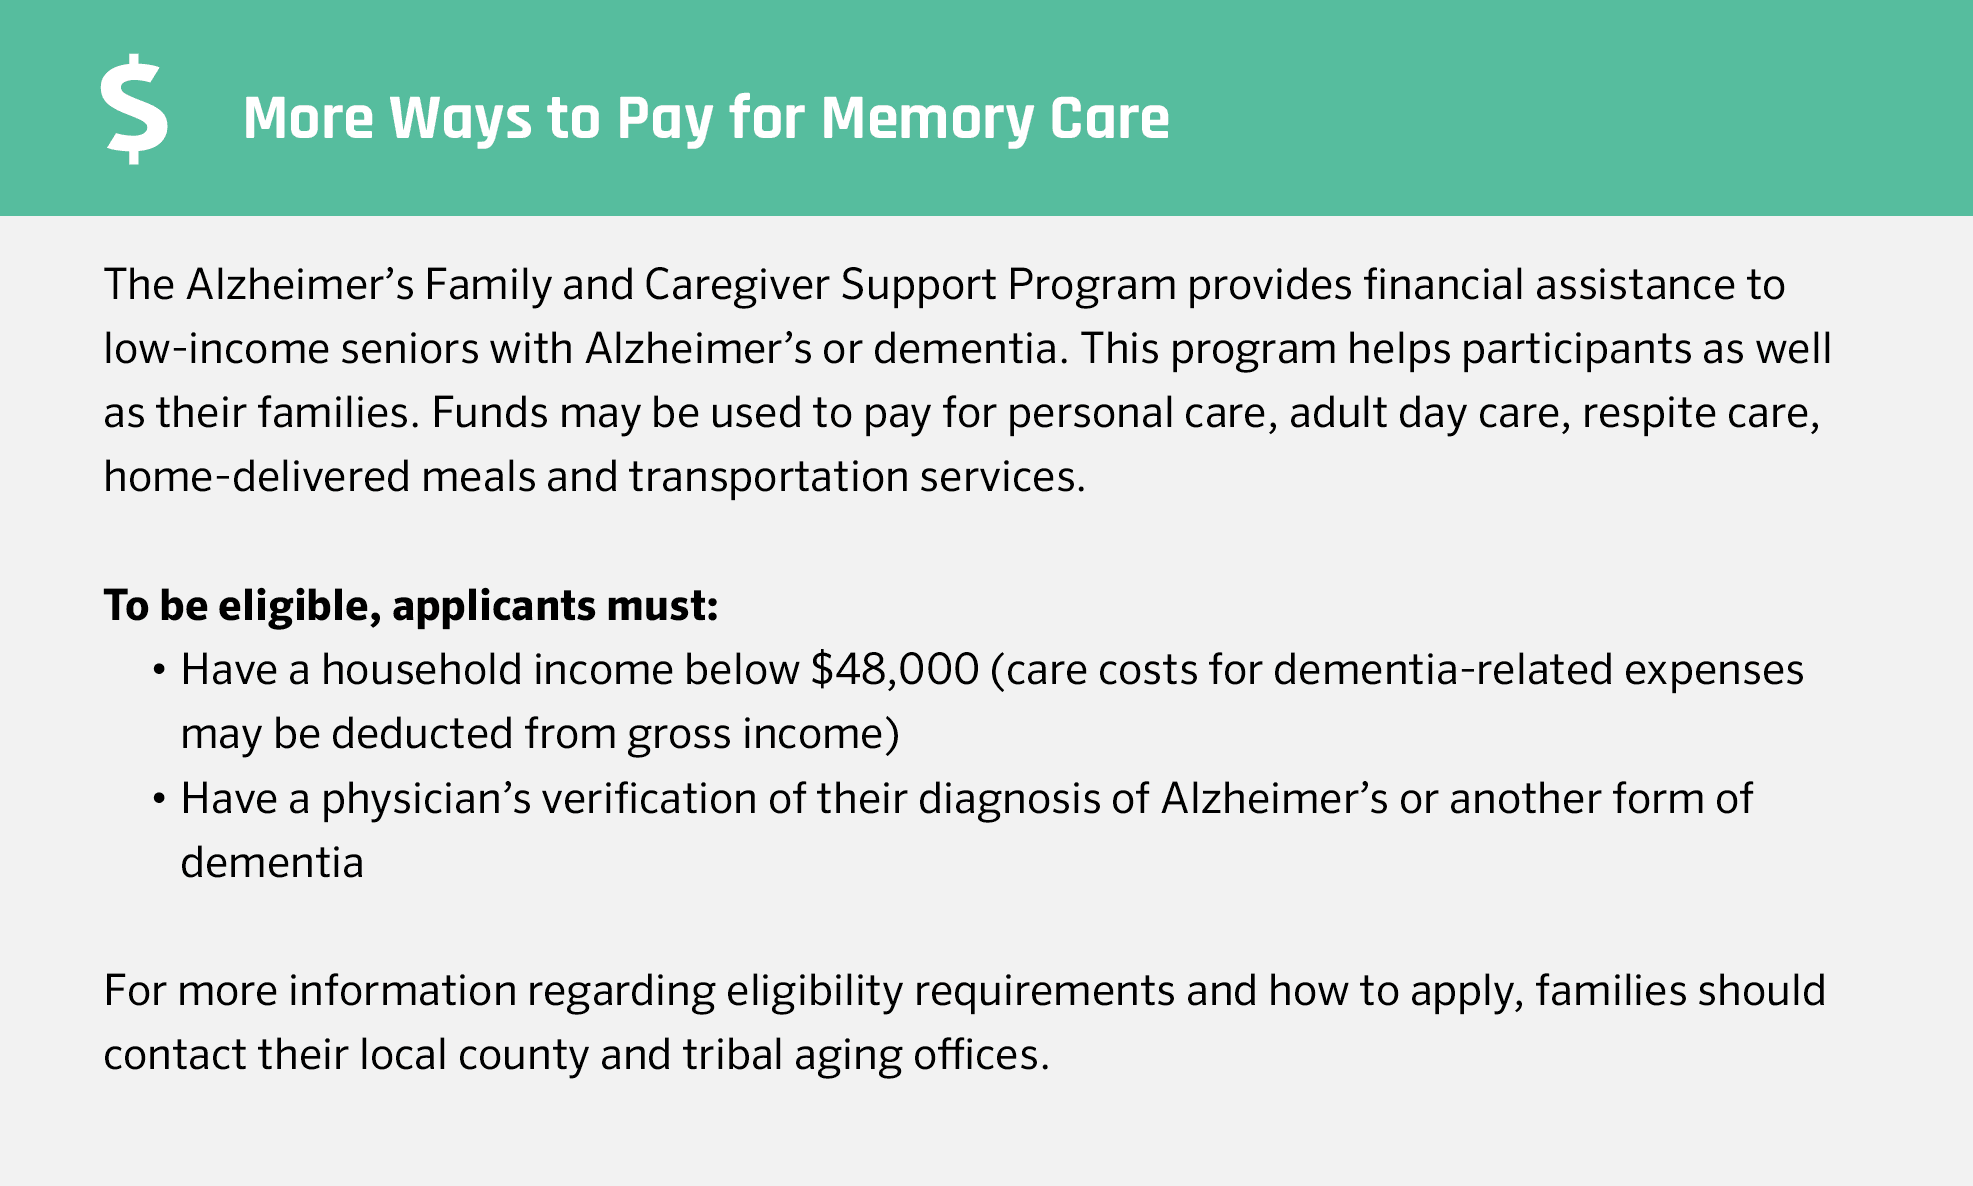 More ways to pay for memory care in WI